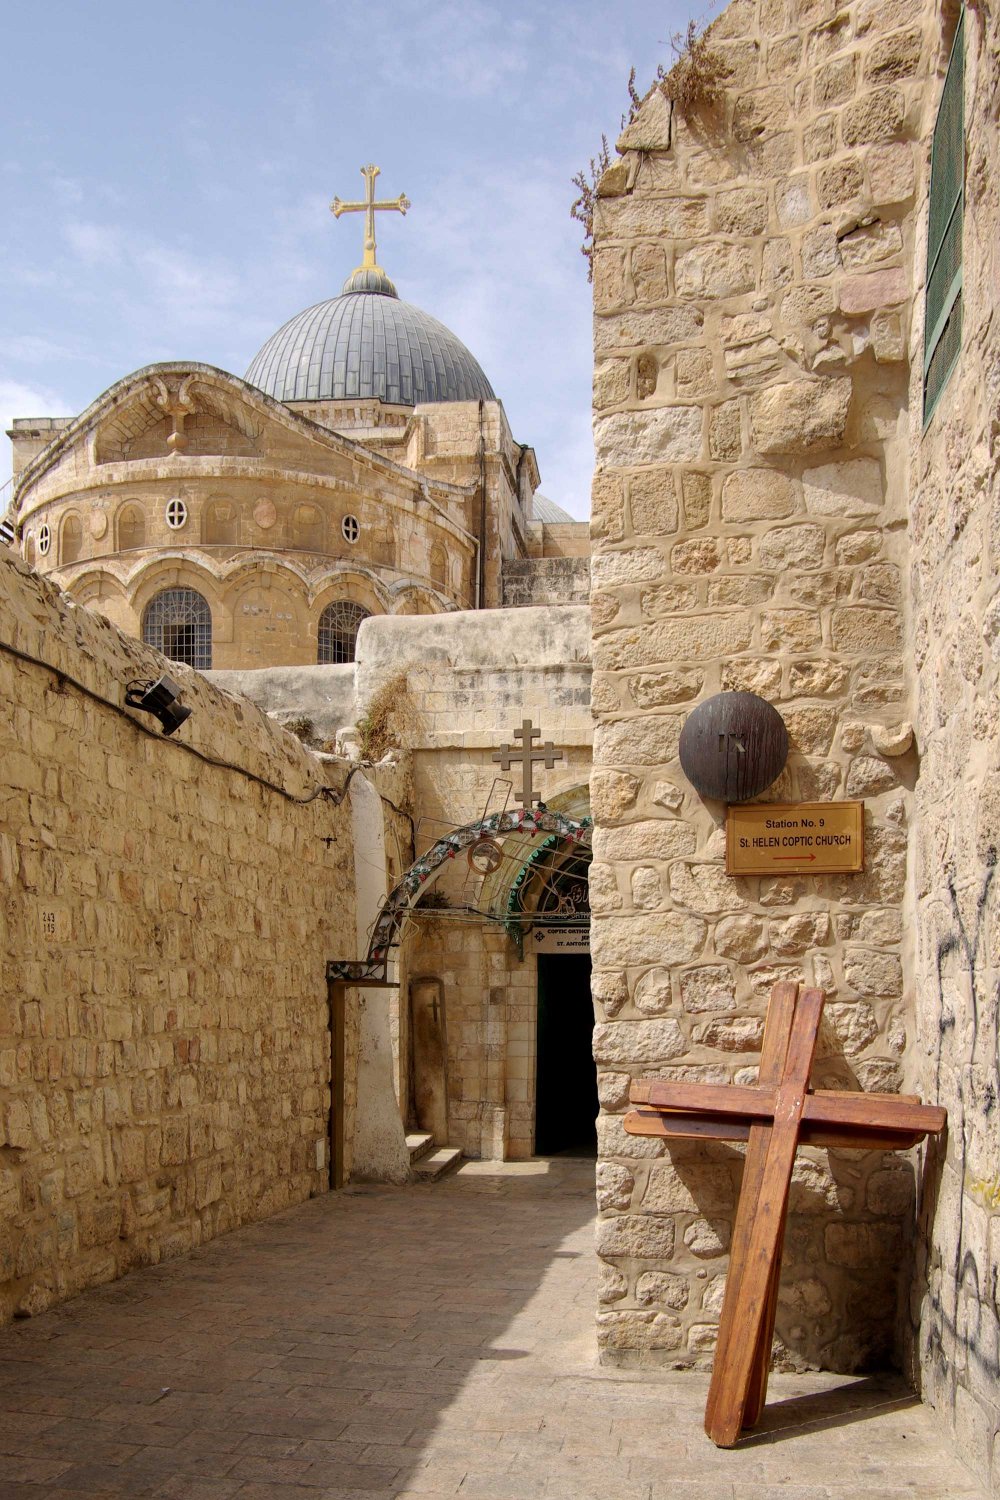 Ninth station along Jerusalem's ancient Via Dolorosa, where Jesus is said to have fallen for the third time while carrying the crucifix